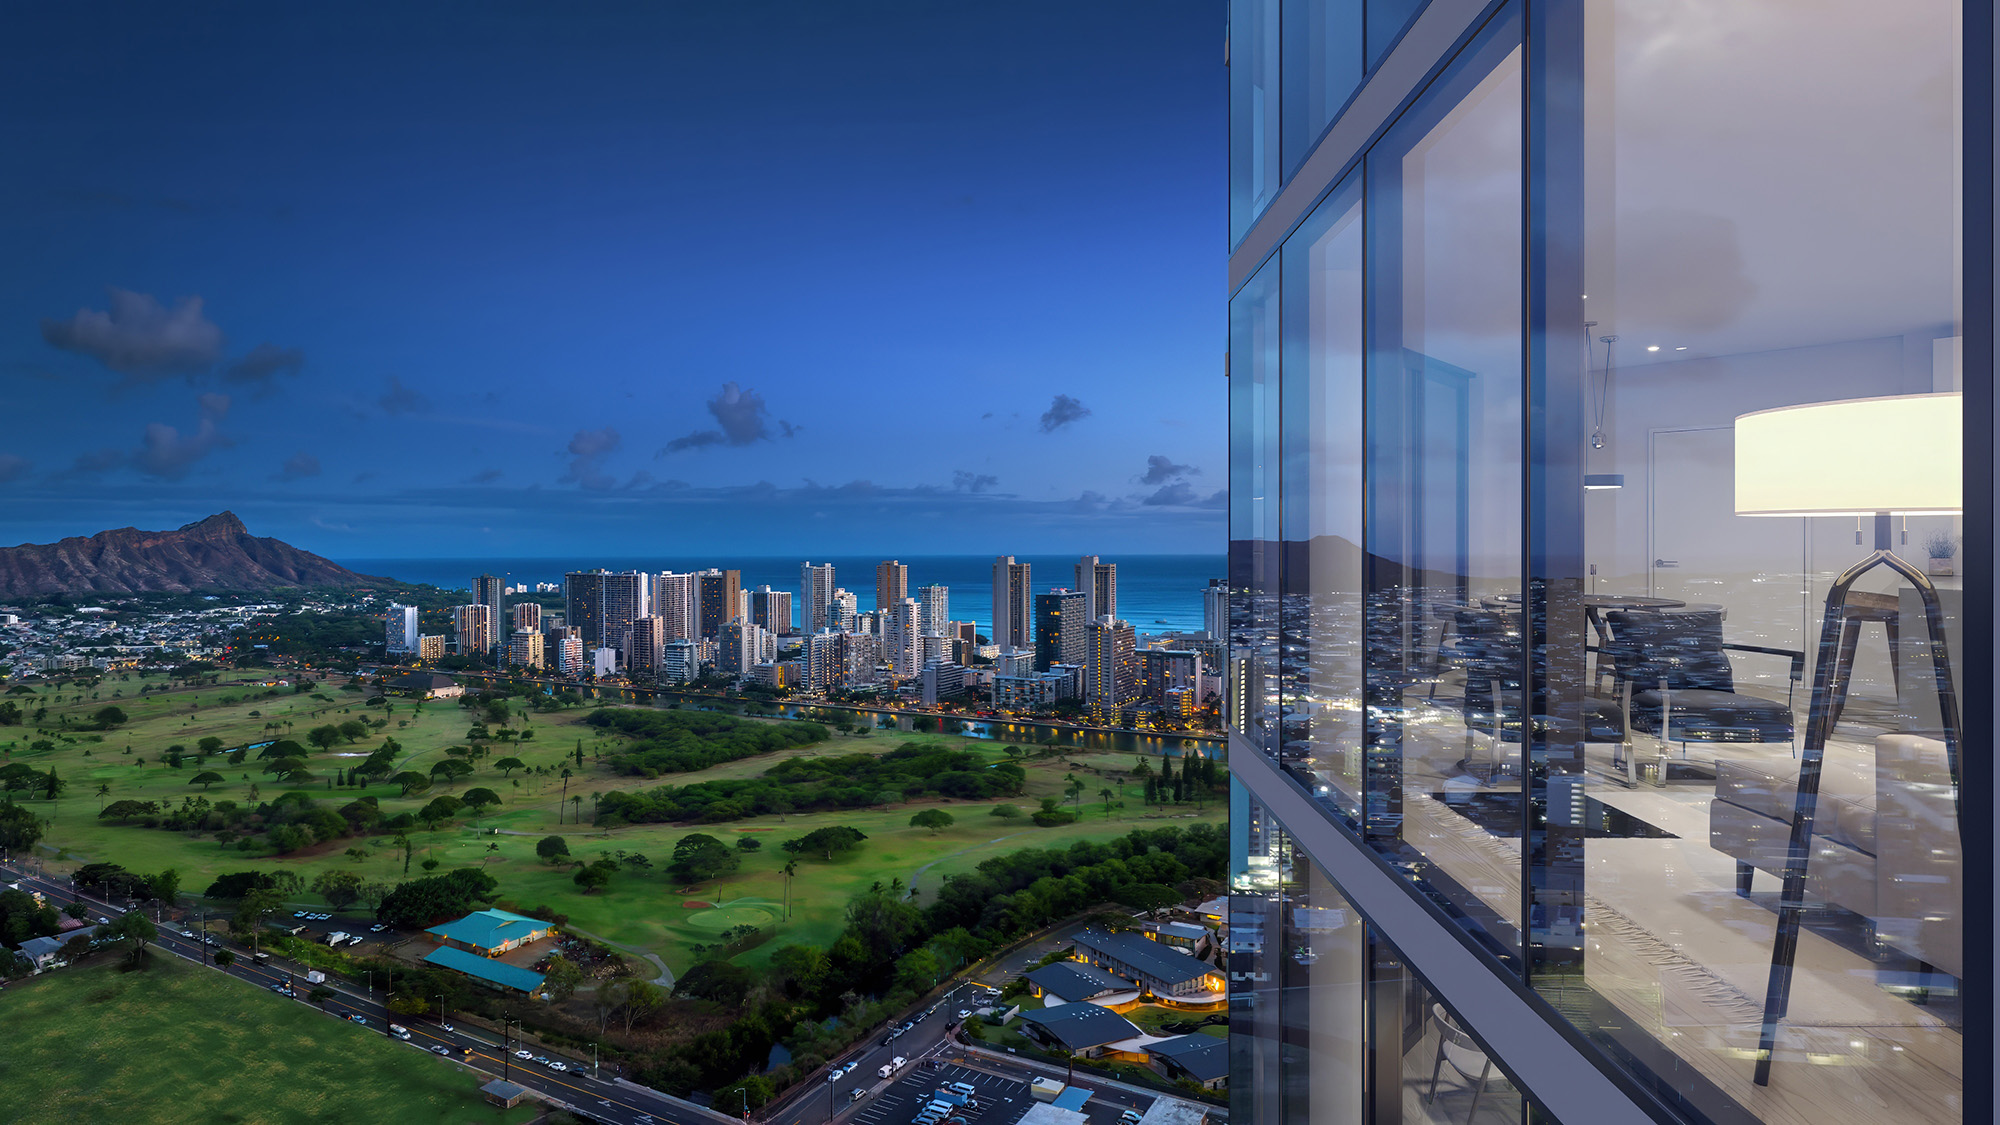 Evening view of the Honolulu/Waikīkī shore from Kuilei Place (rendering)